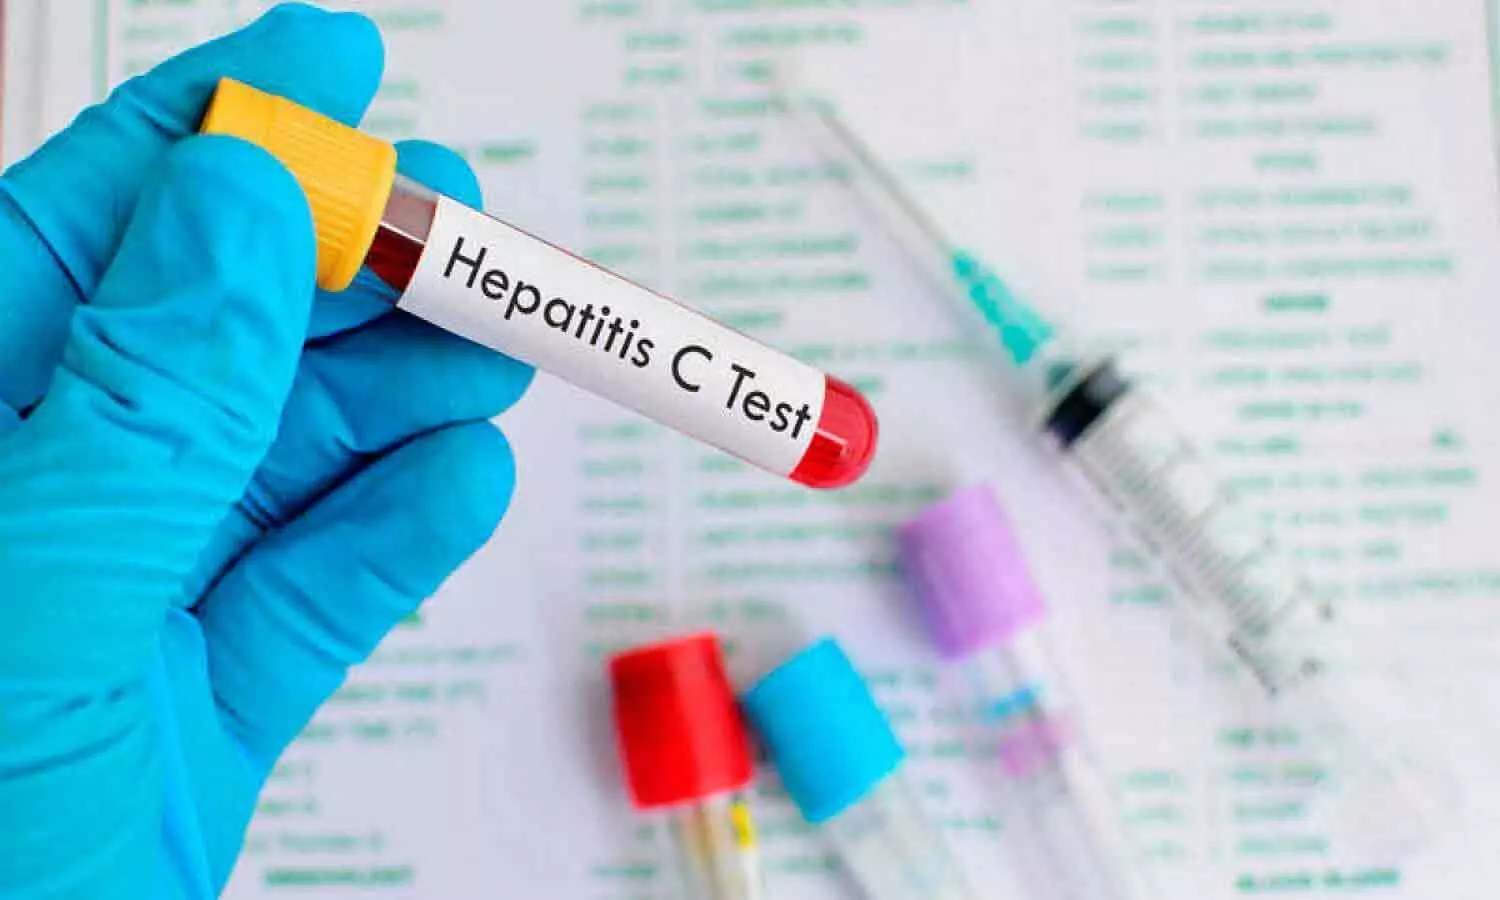 Antiviral treatment for hepatitis C reduces risk of post-treatment liver cancer progression, study shows